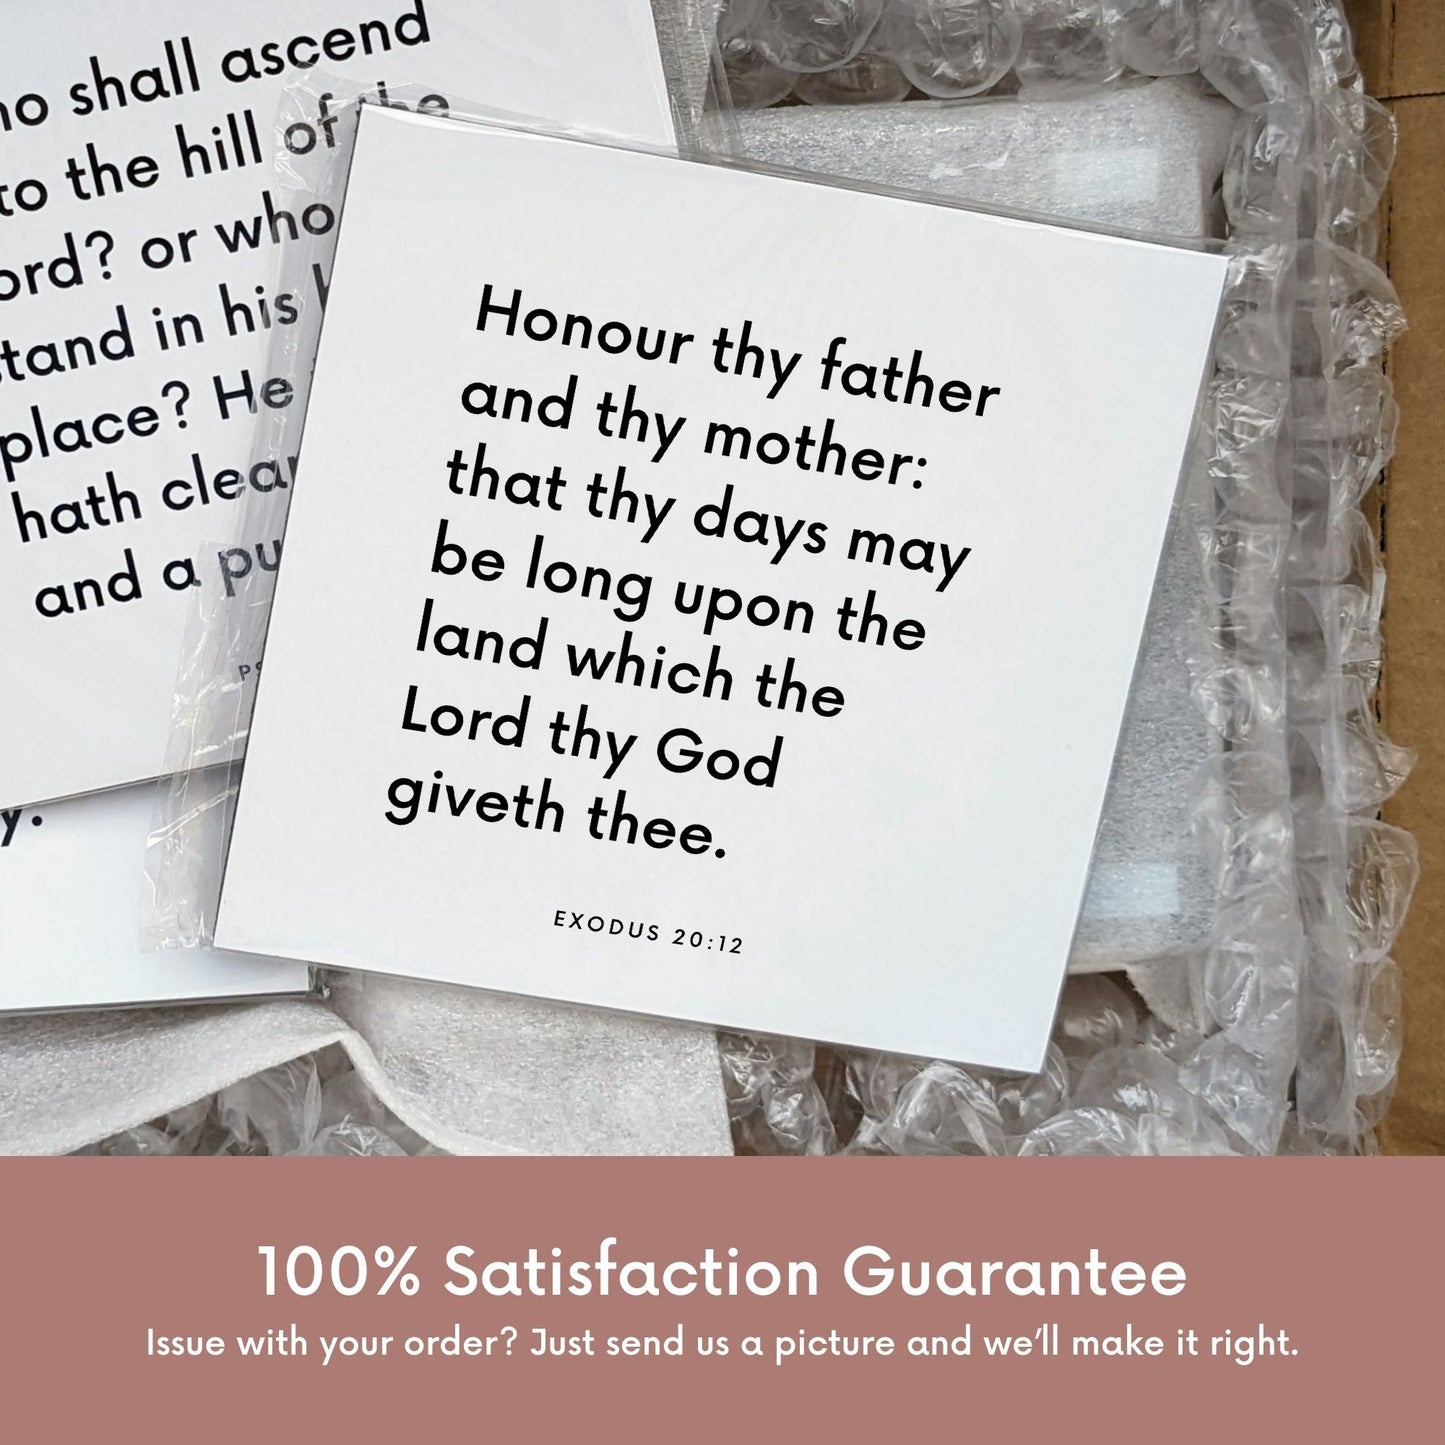 Shipping materials for scripture tile of Exodus 20:12 - "Honour thy father and thy mother"